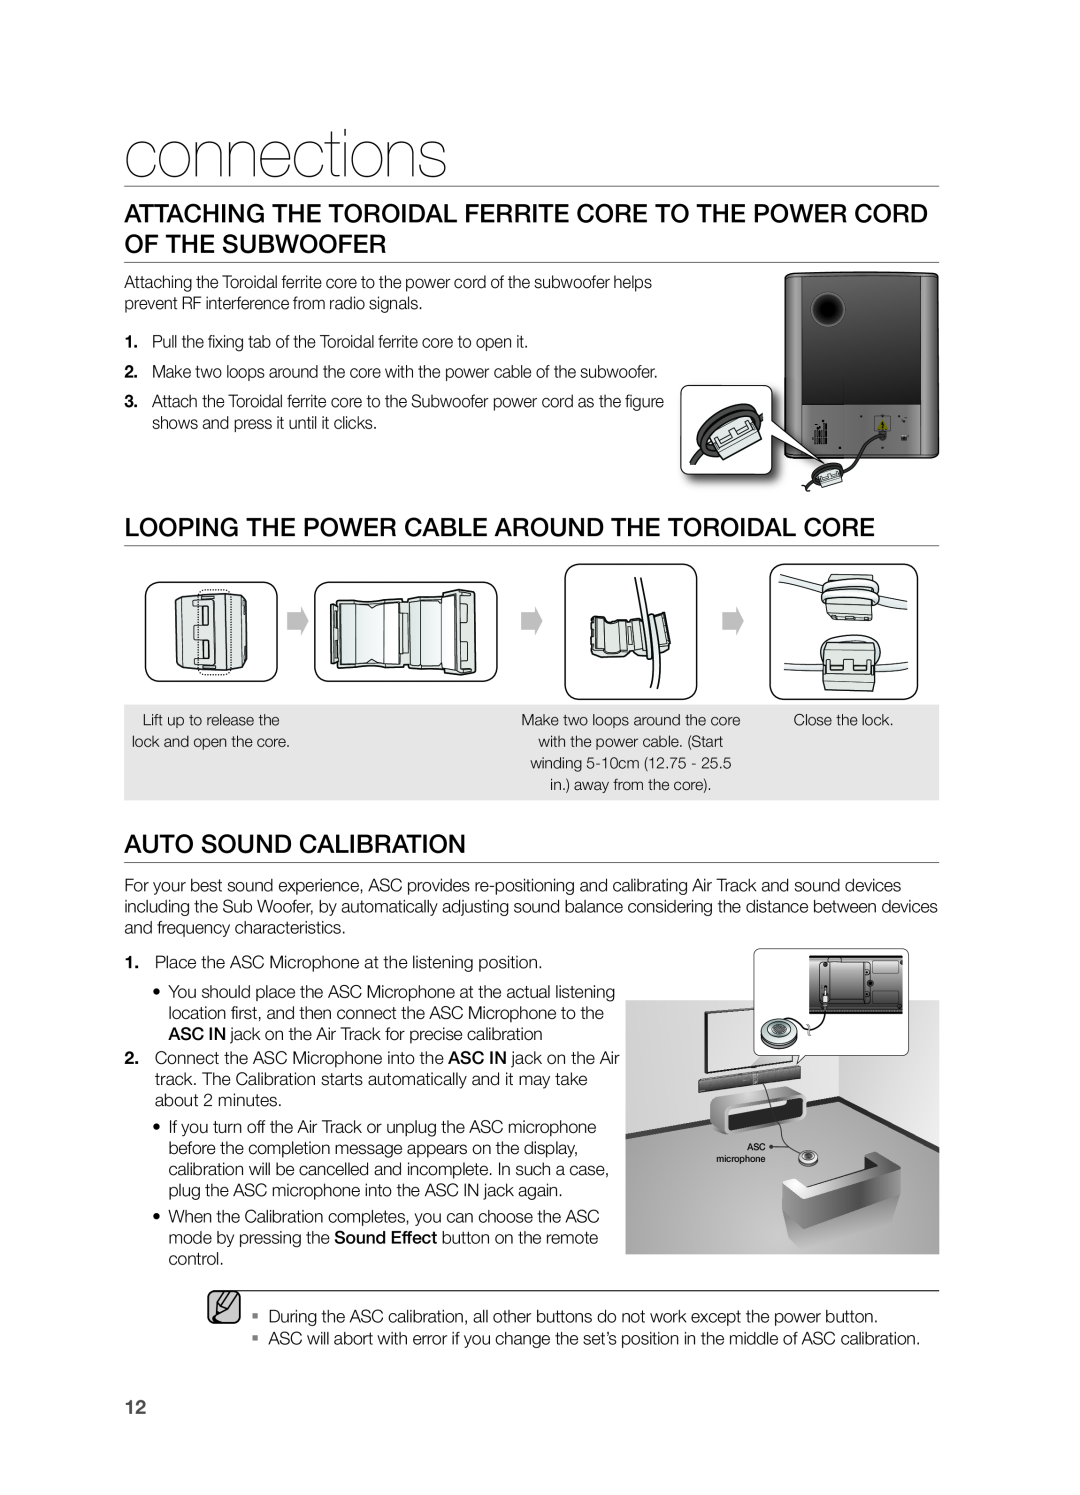 Samsung HWF750ZA, HW F750 user manual Looping The Power Cable Around The Toroidal Core, Auto Sound Calibration, connections 